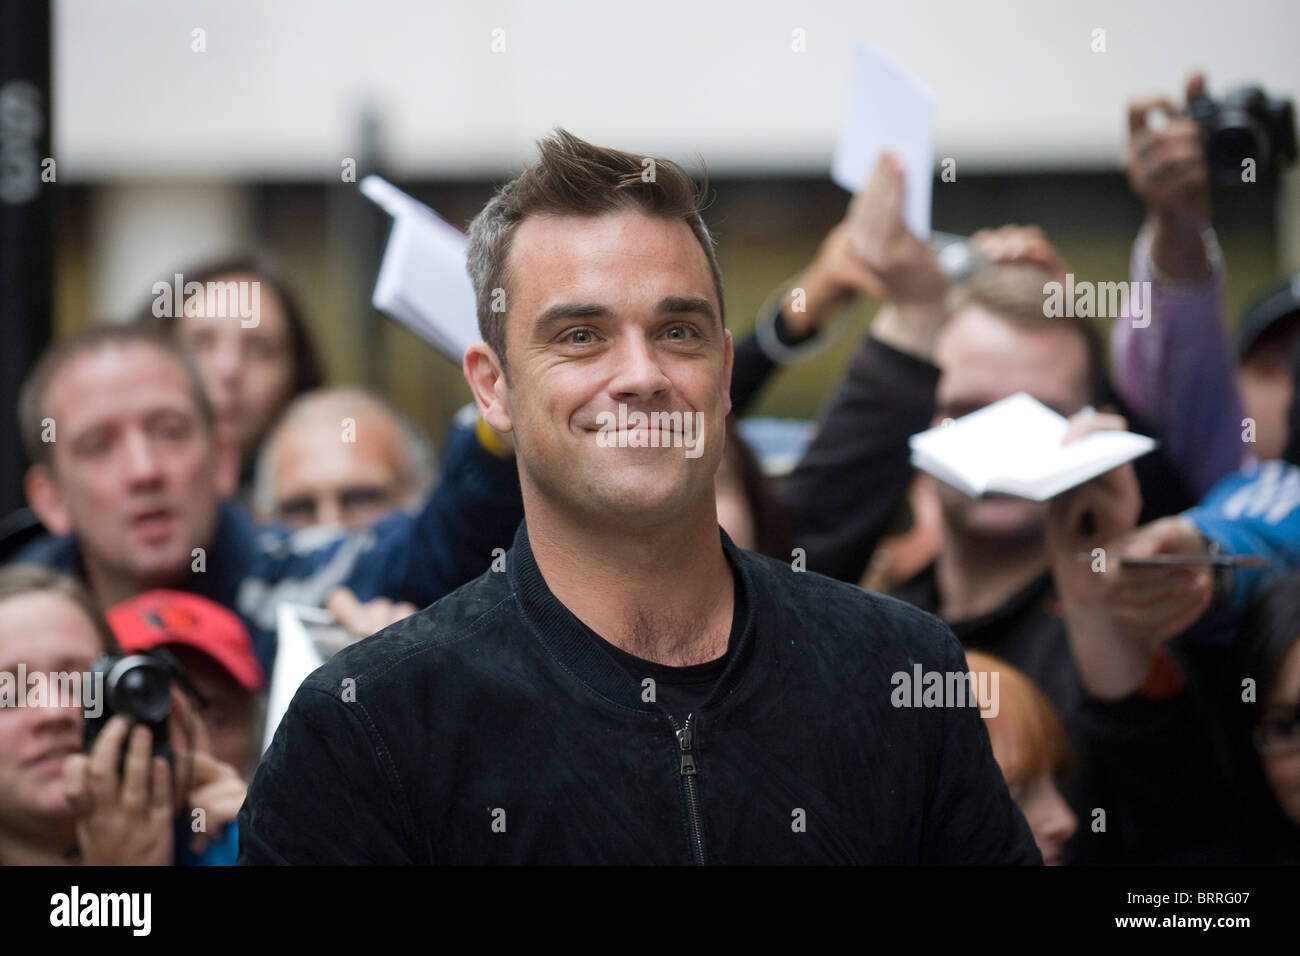 Robbie Williams arrives at Radio 2 interview with fans behind Stock Photo